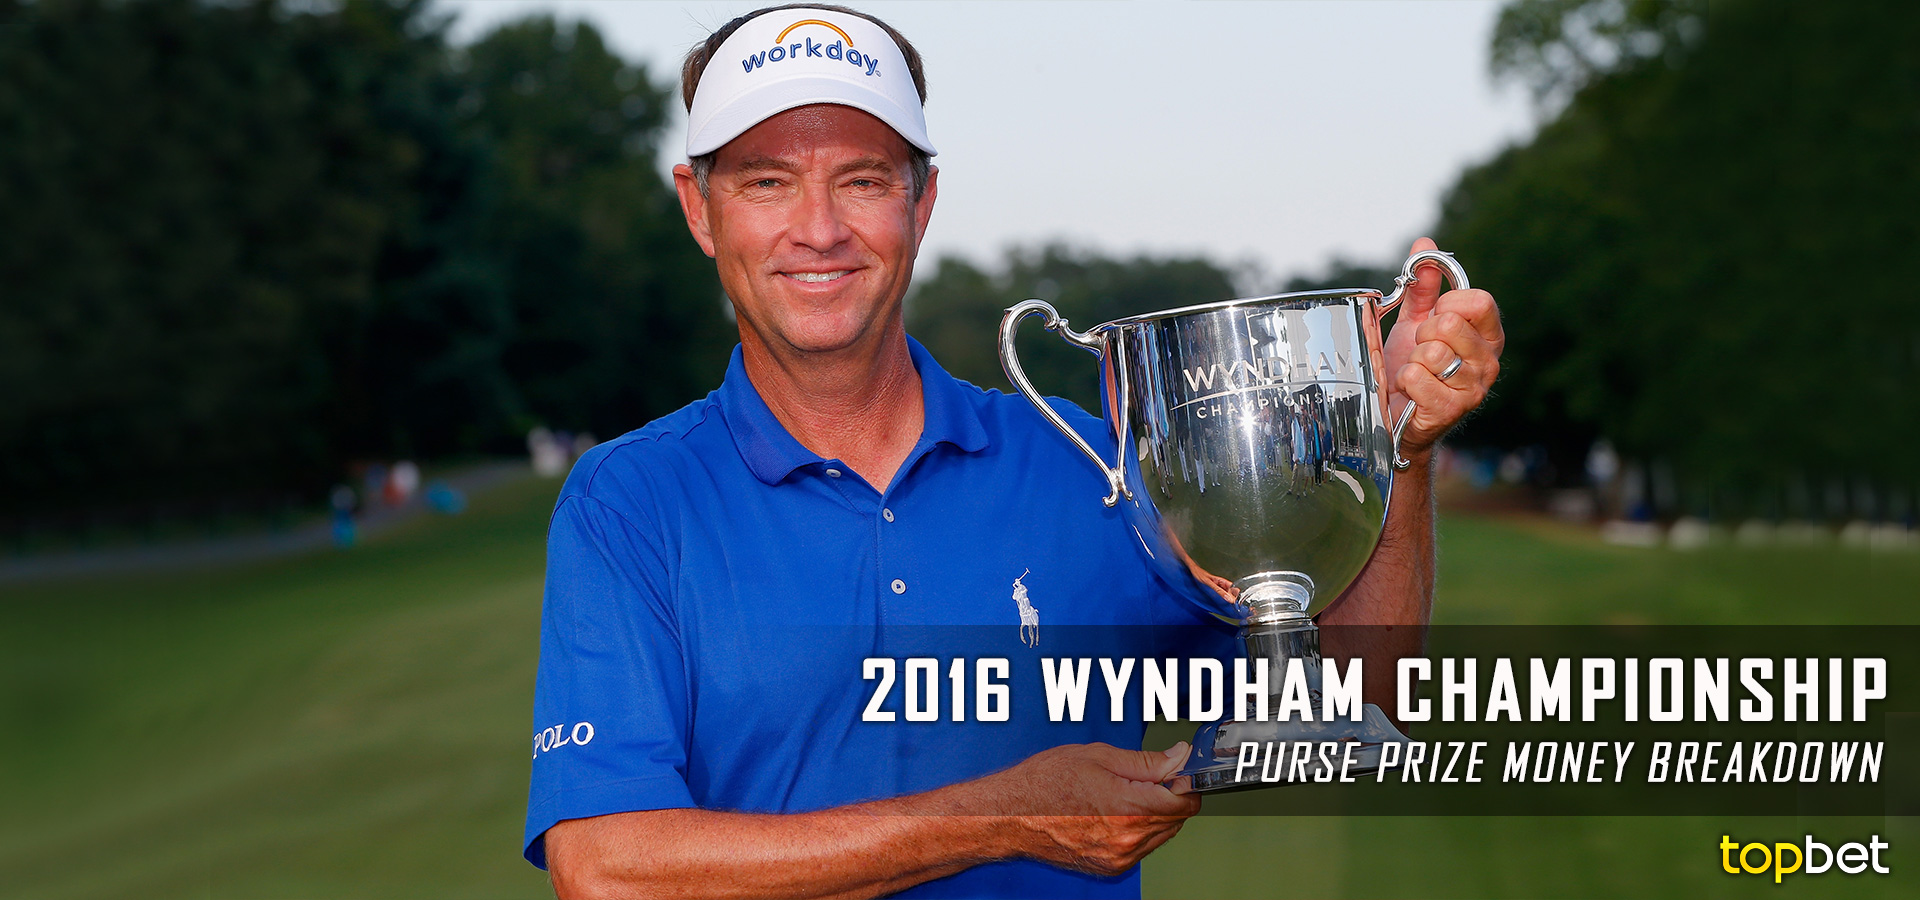 Prize money breakdown for 2016 us open golf and more intraday trading